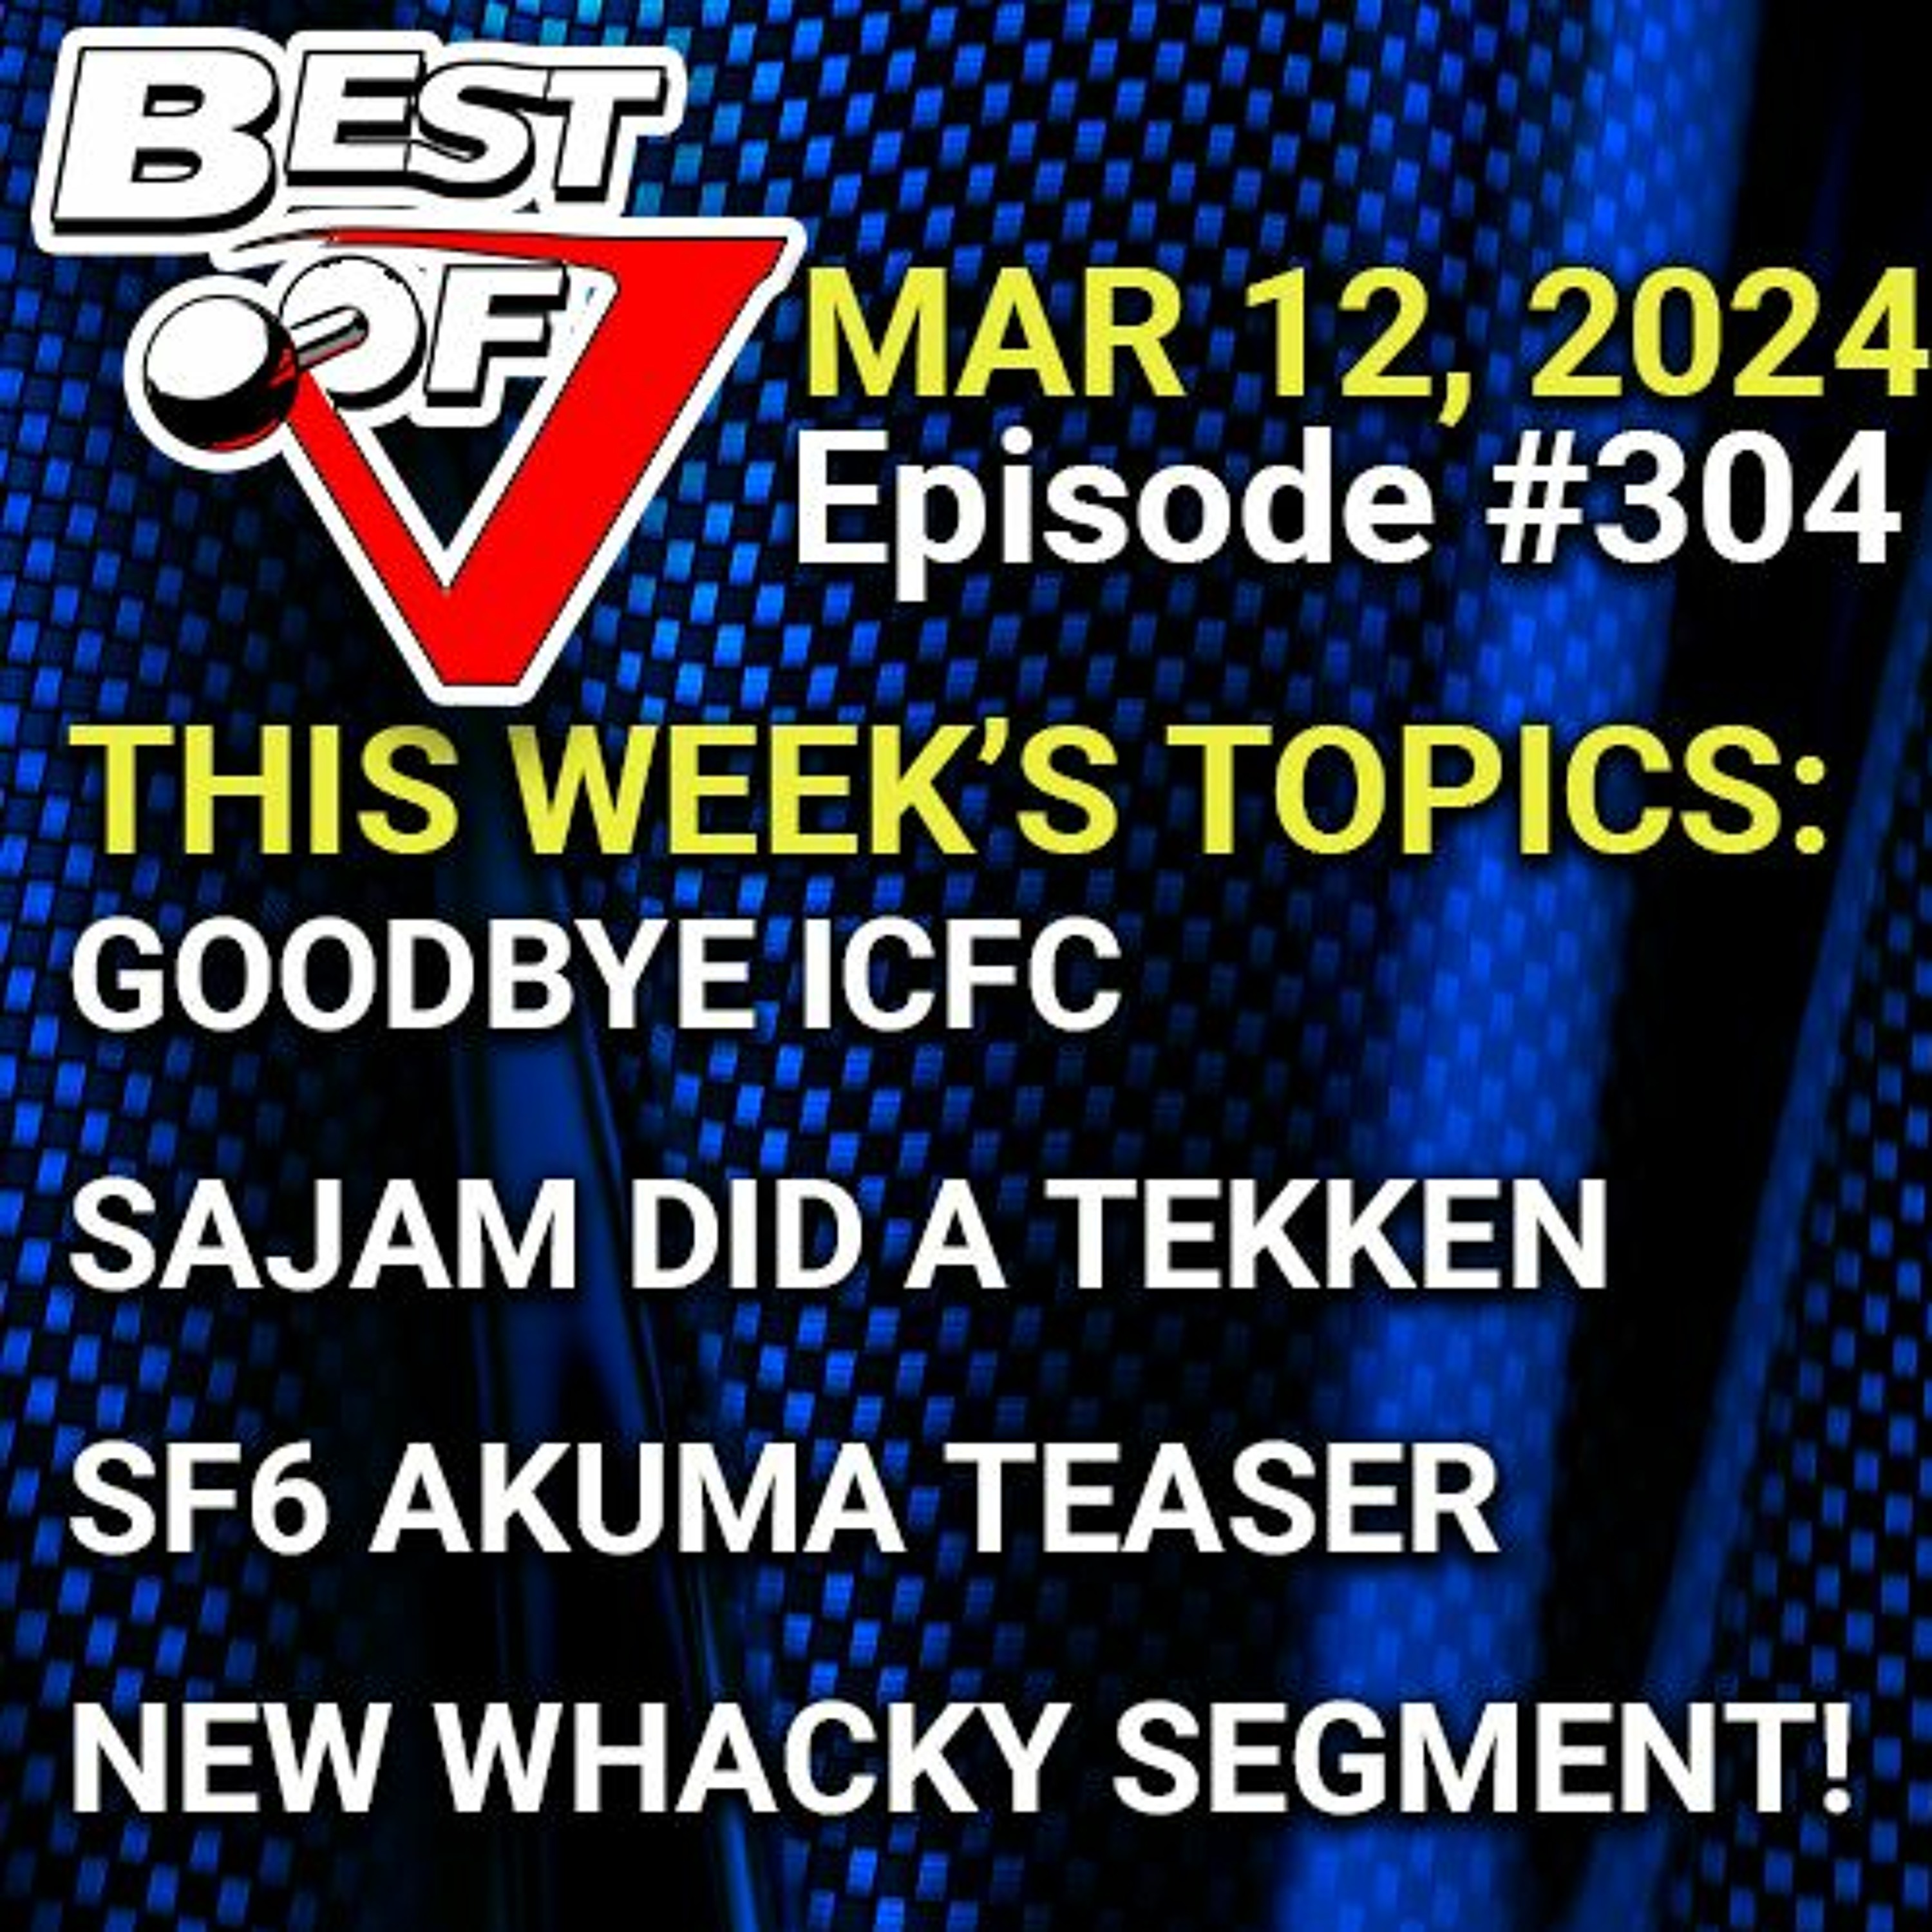 Episode 304 - Disappointing SF6 news, and a NEW SEGMENT!